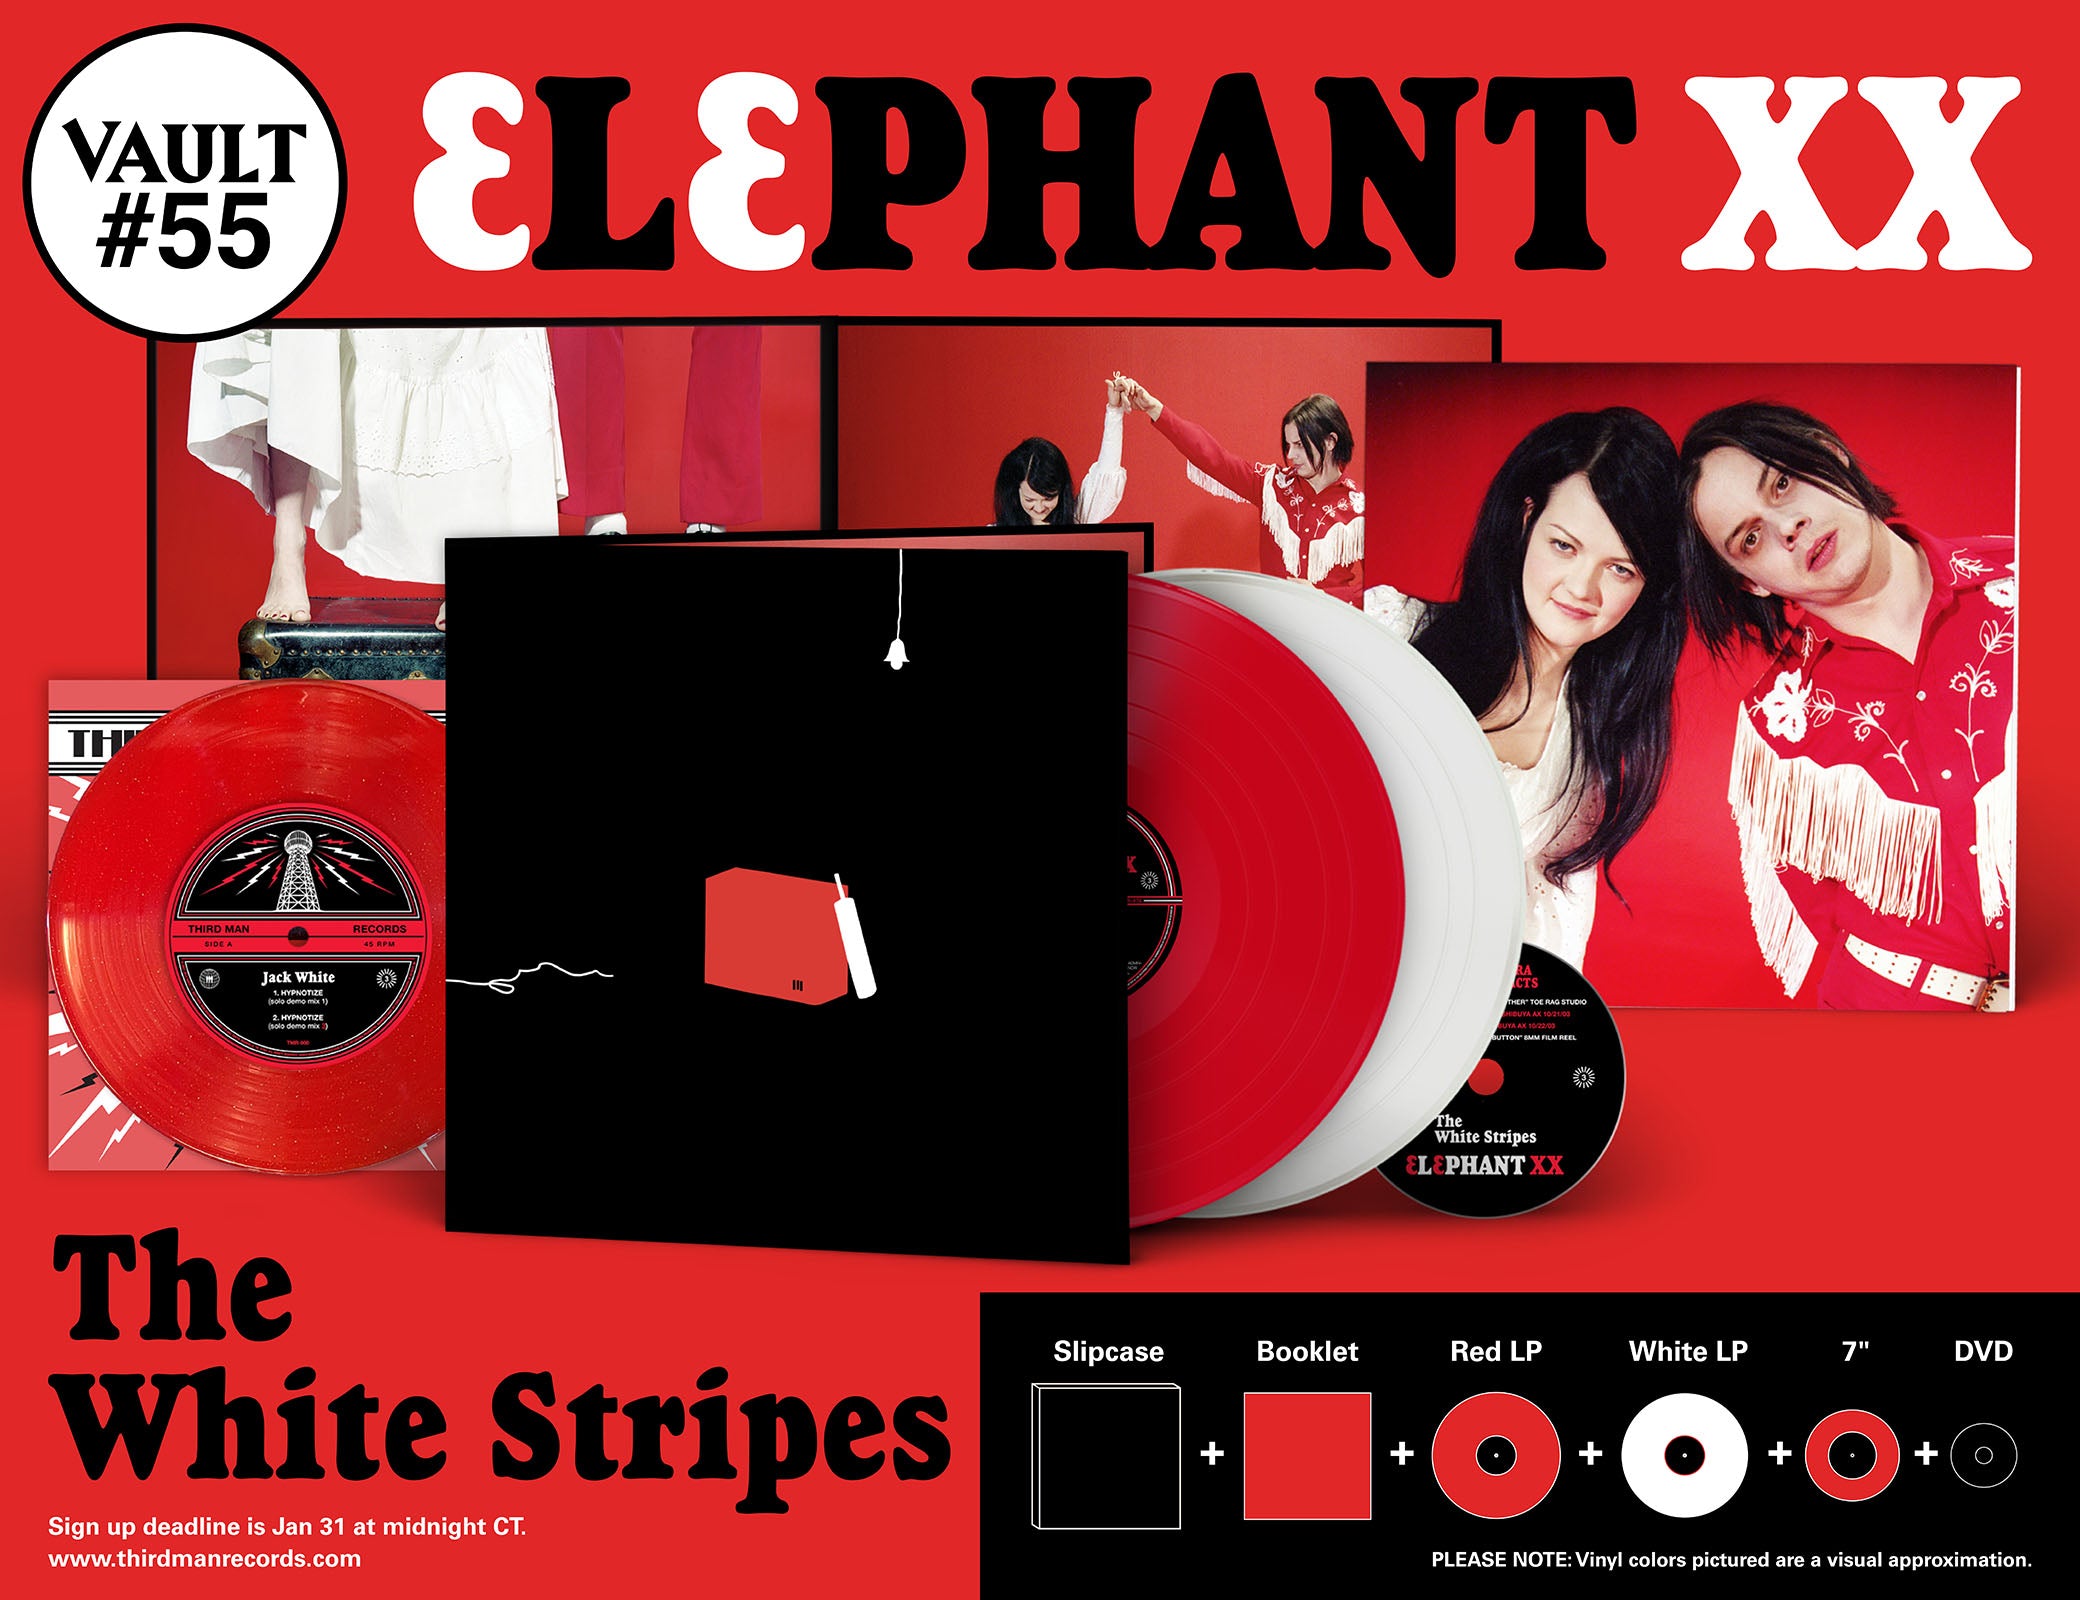 THIRD MAN RECORDS ANNOUNCES VAULT PACKAGE #55: THE WHITE STRIPES 